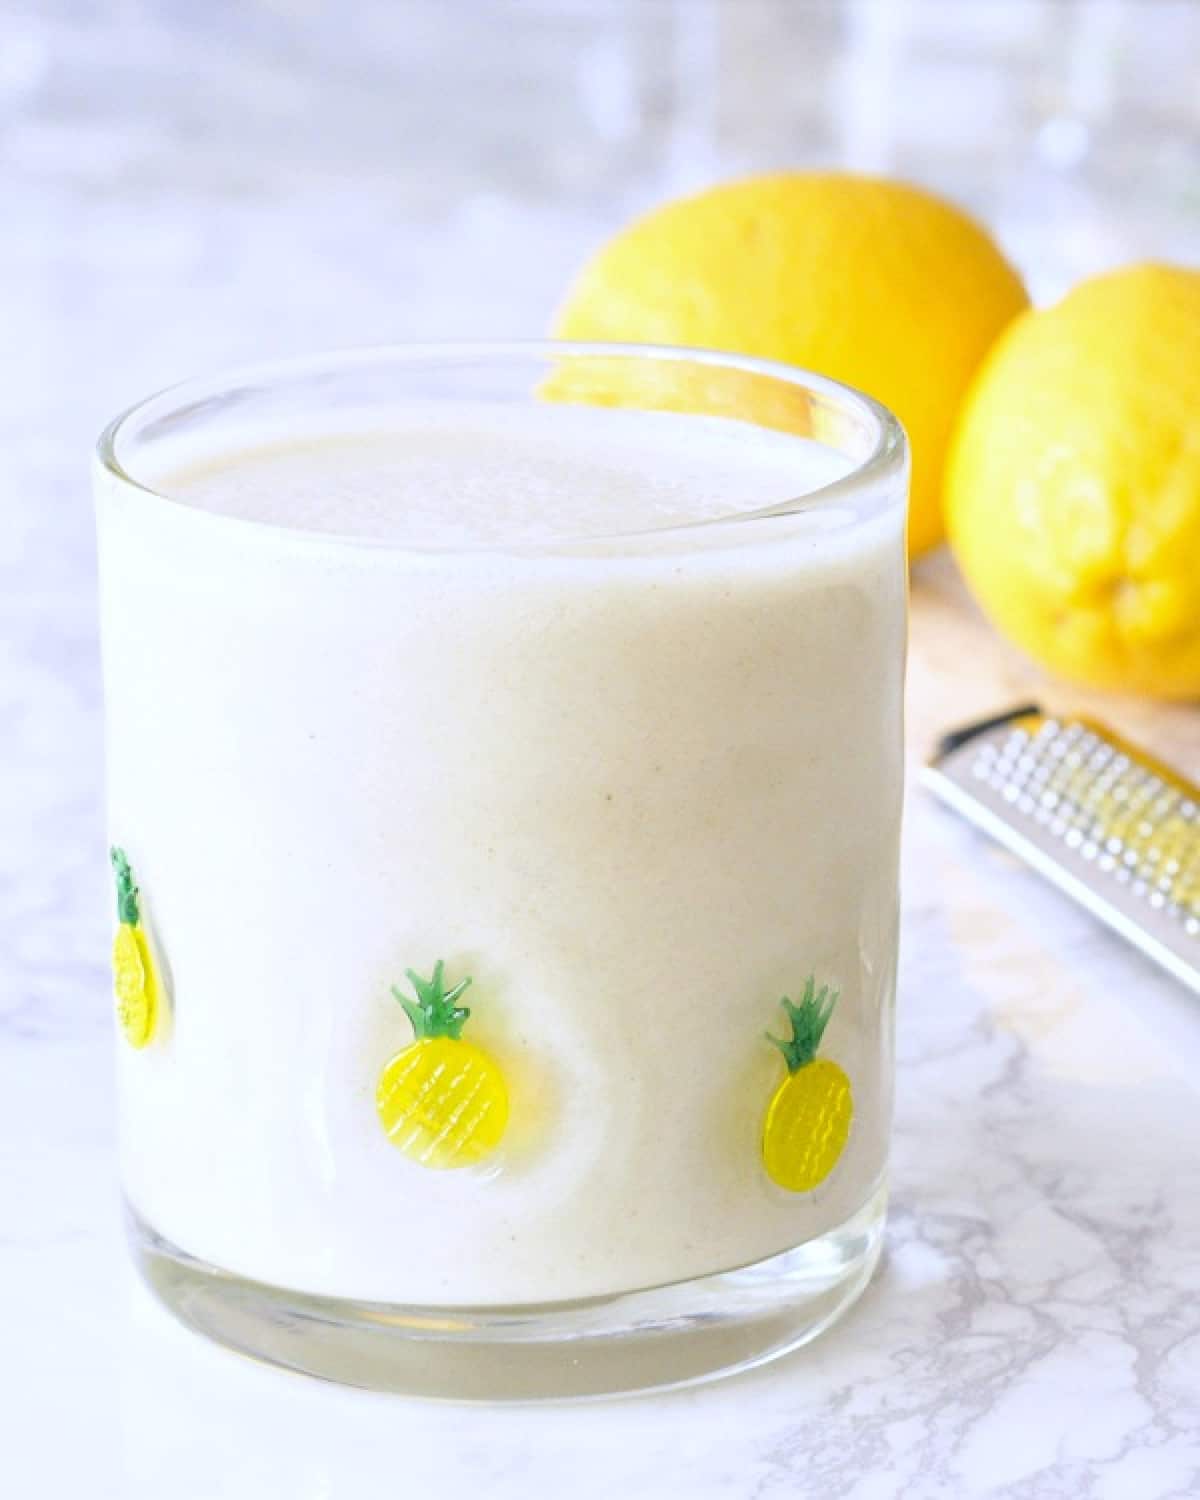 a short clear glass filled with a lemon smoothie that is white in color. two fresh lemons and a zester sit behind the smoothie.